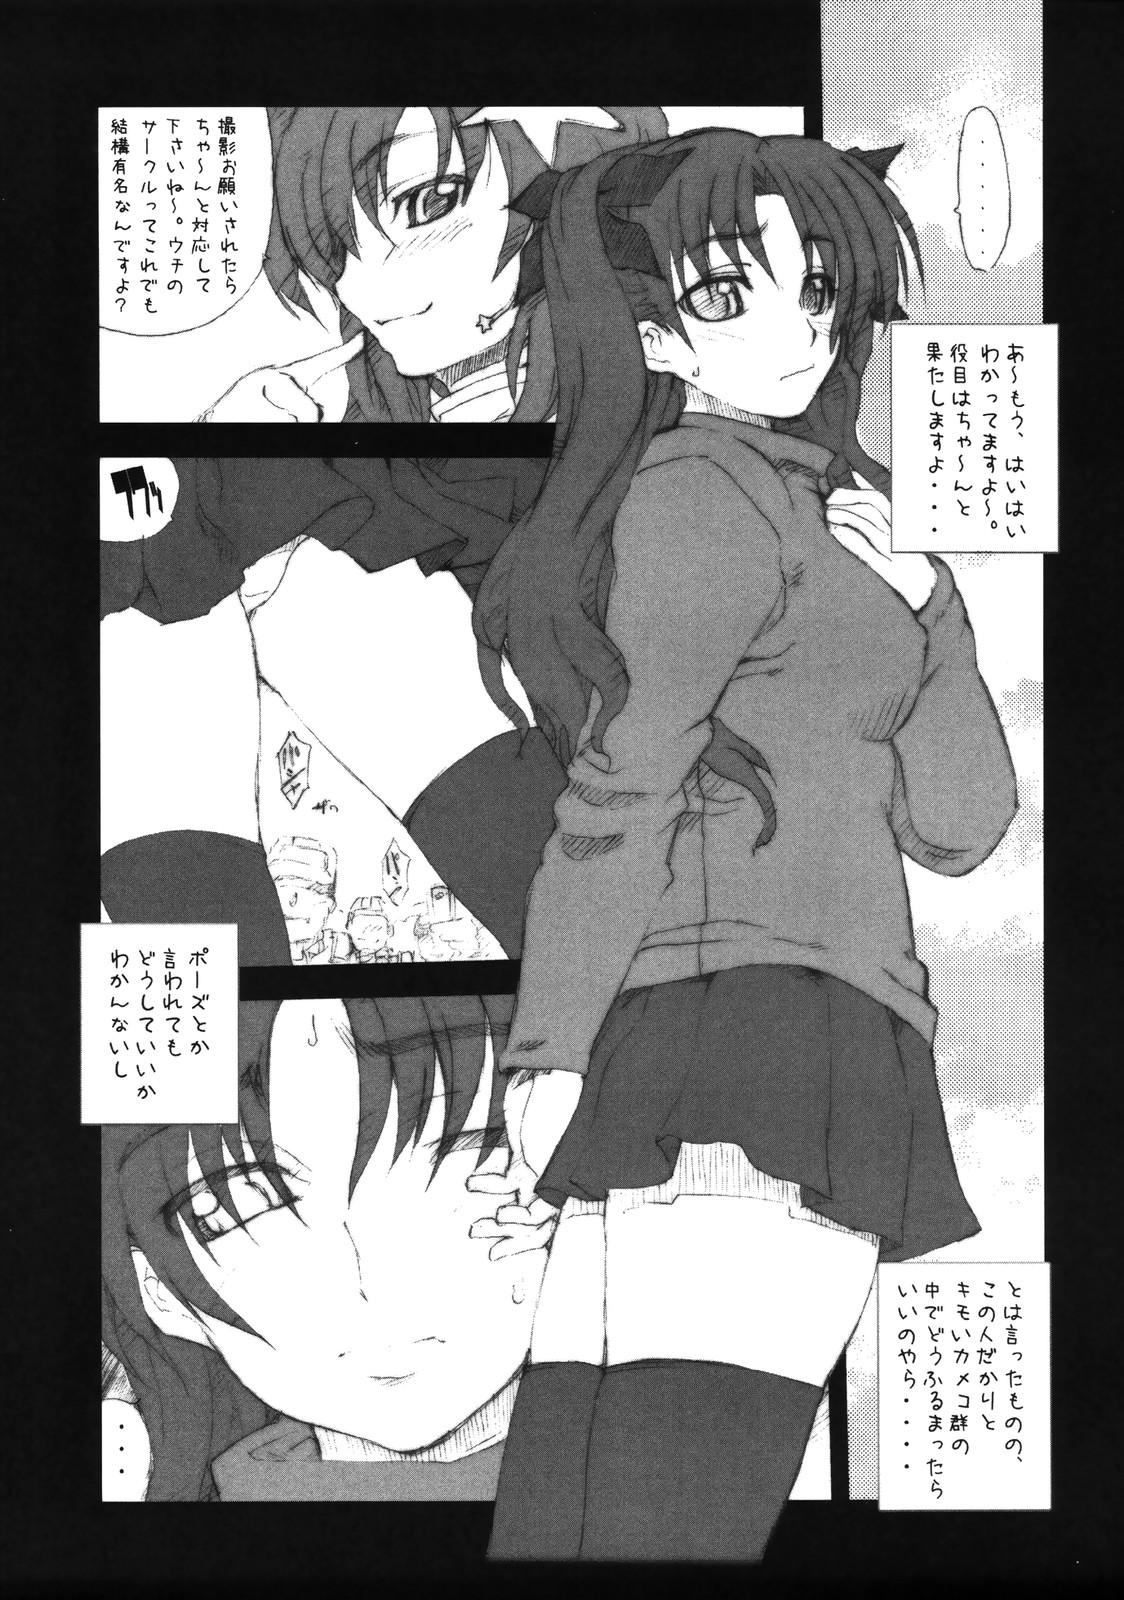 Grande SHOT MANIA 2nd STAGE - Fate stay night Ass Licking - Page 7